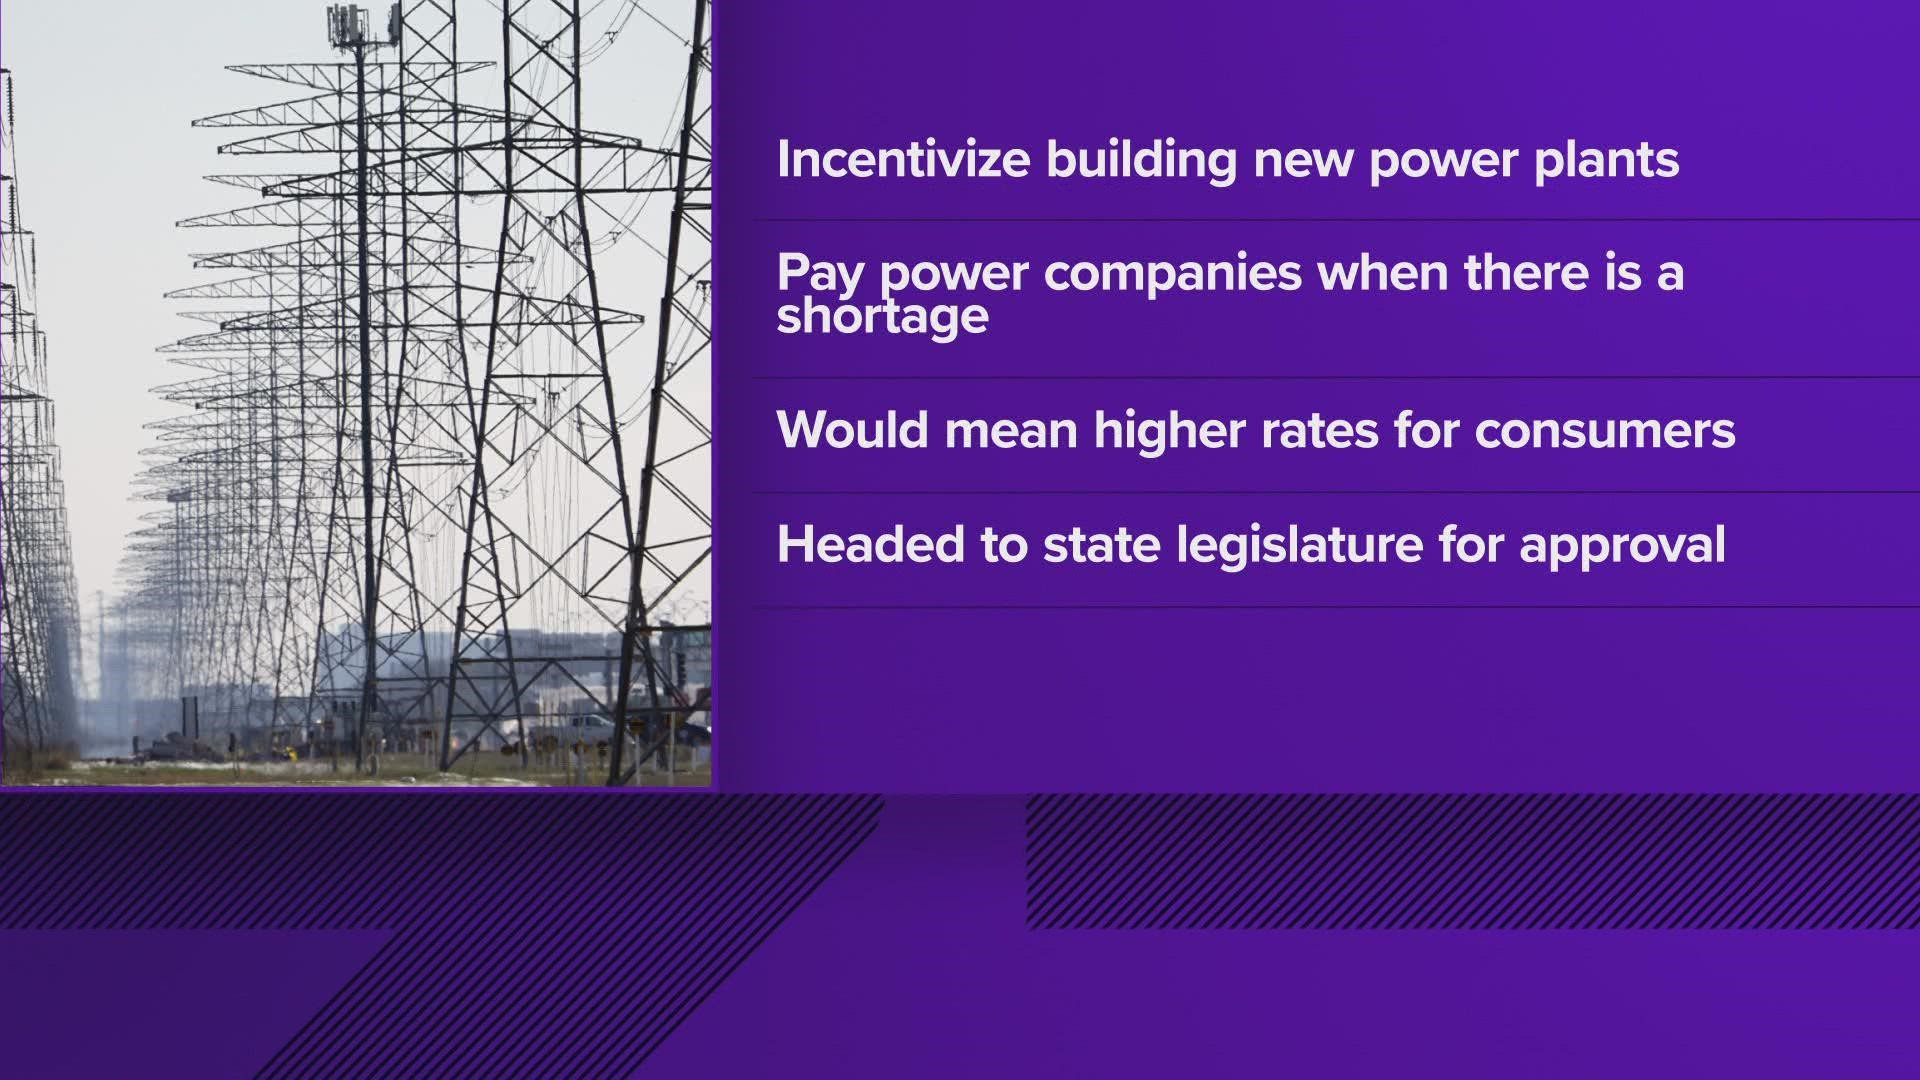 The proposed plan would pay power companies that produce electricity to be available when there’s an electricity shortage on the grid.